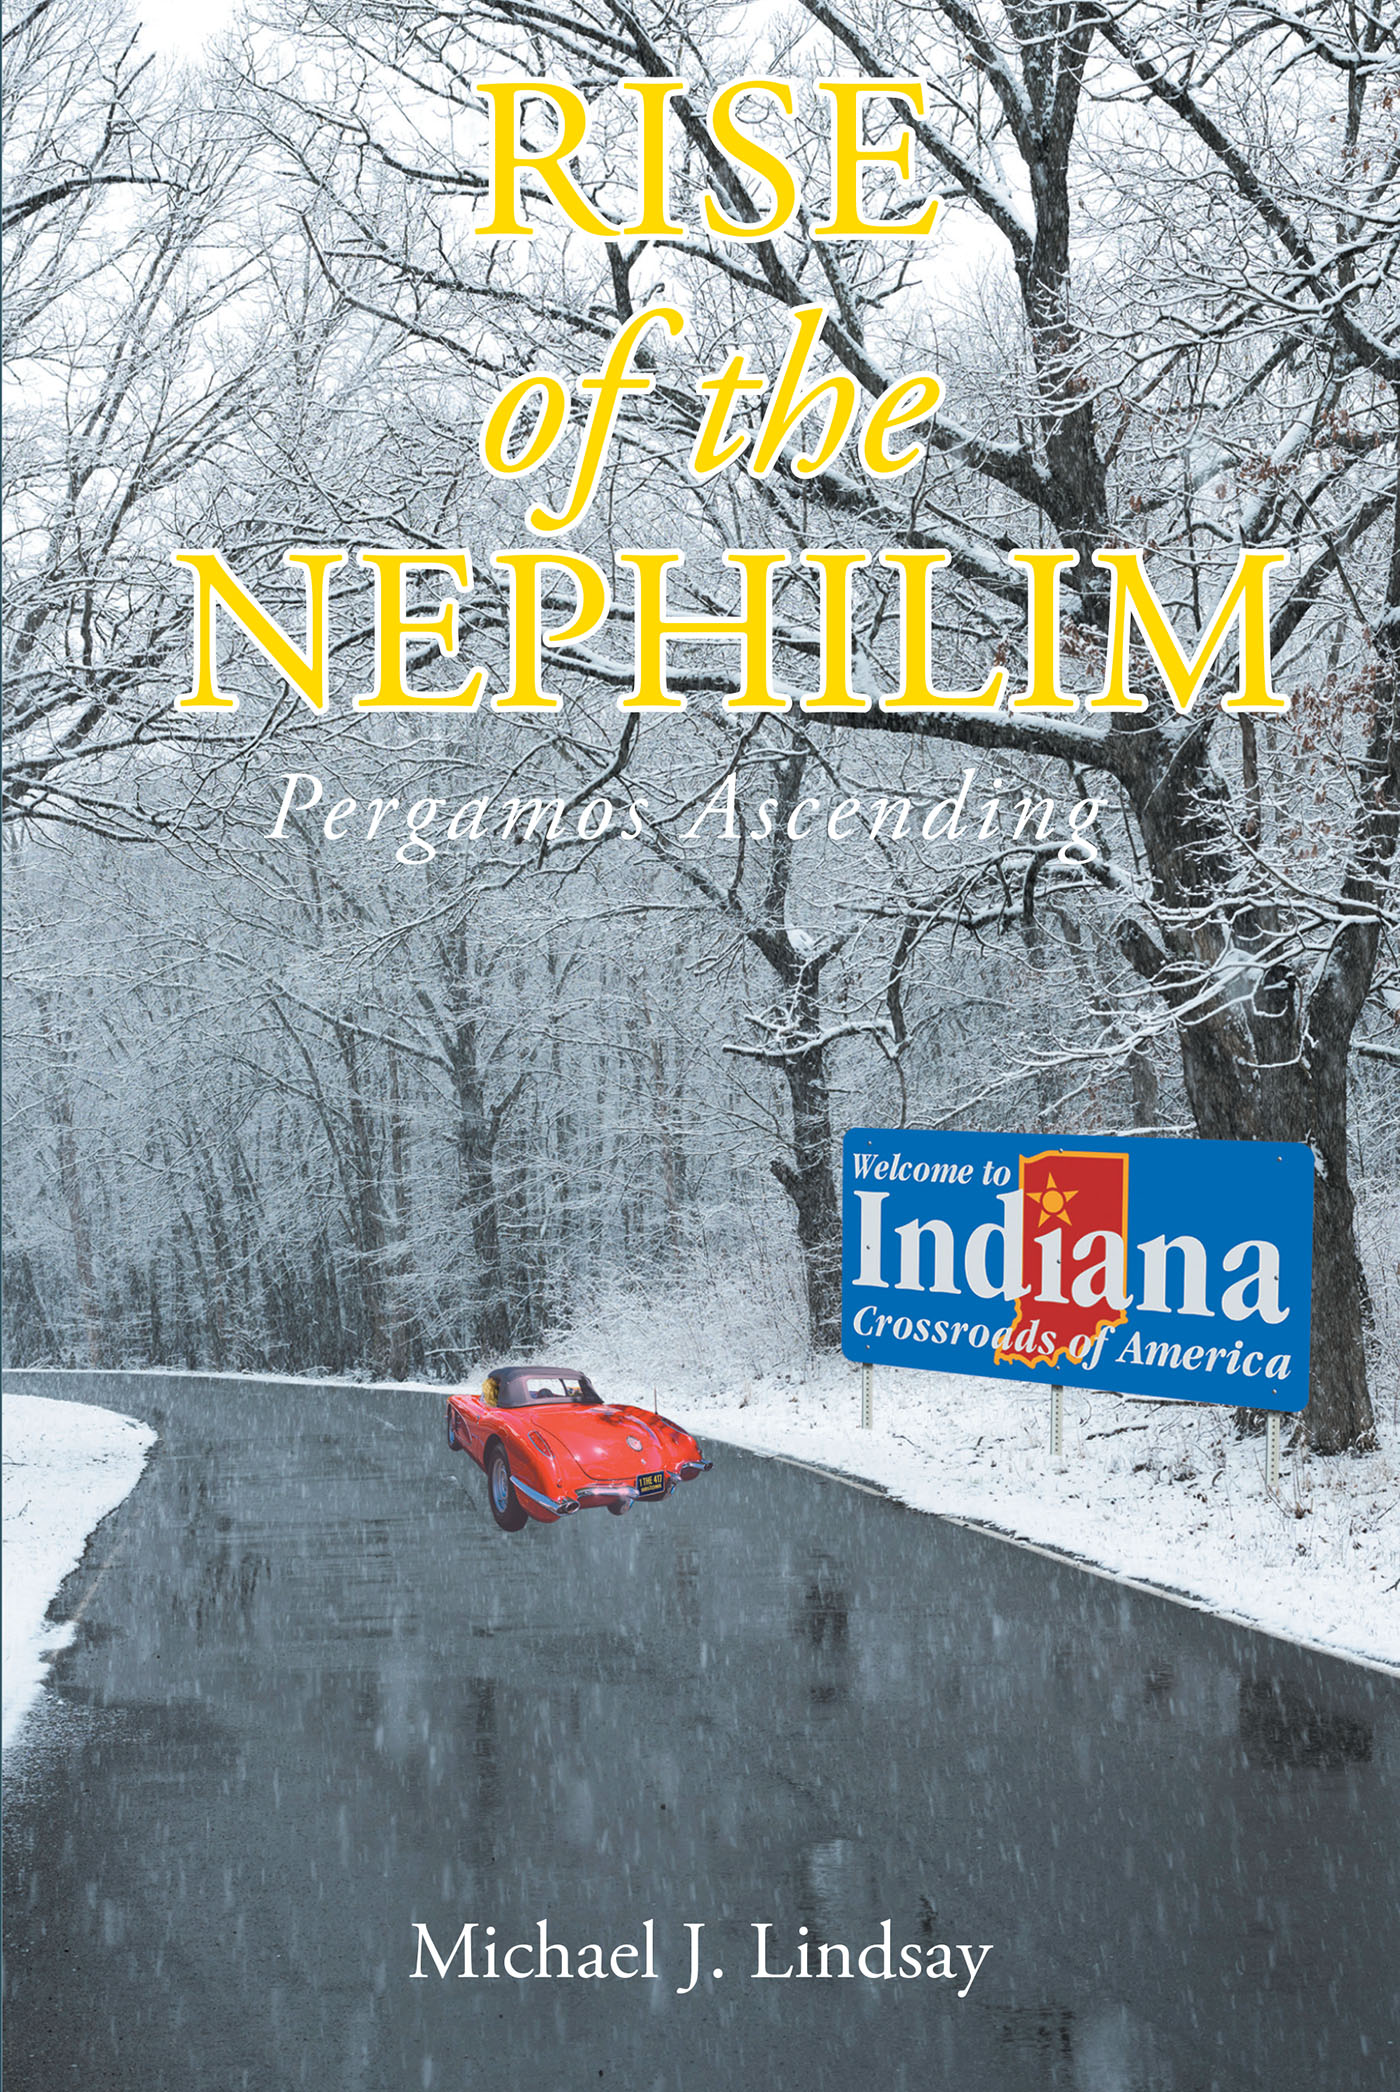 Michael J. Lindsay’s Newly Released "Rise of the Nephilim: Pergamos Ascending" is a Compelling Continuation of the John Michael Mcintyre Saga